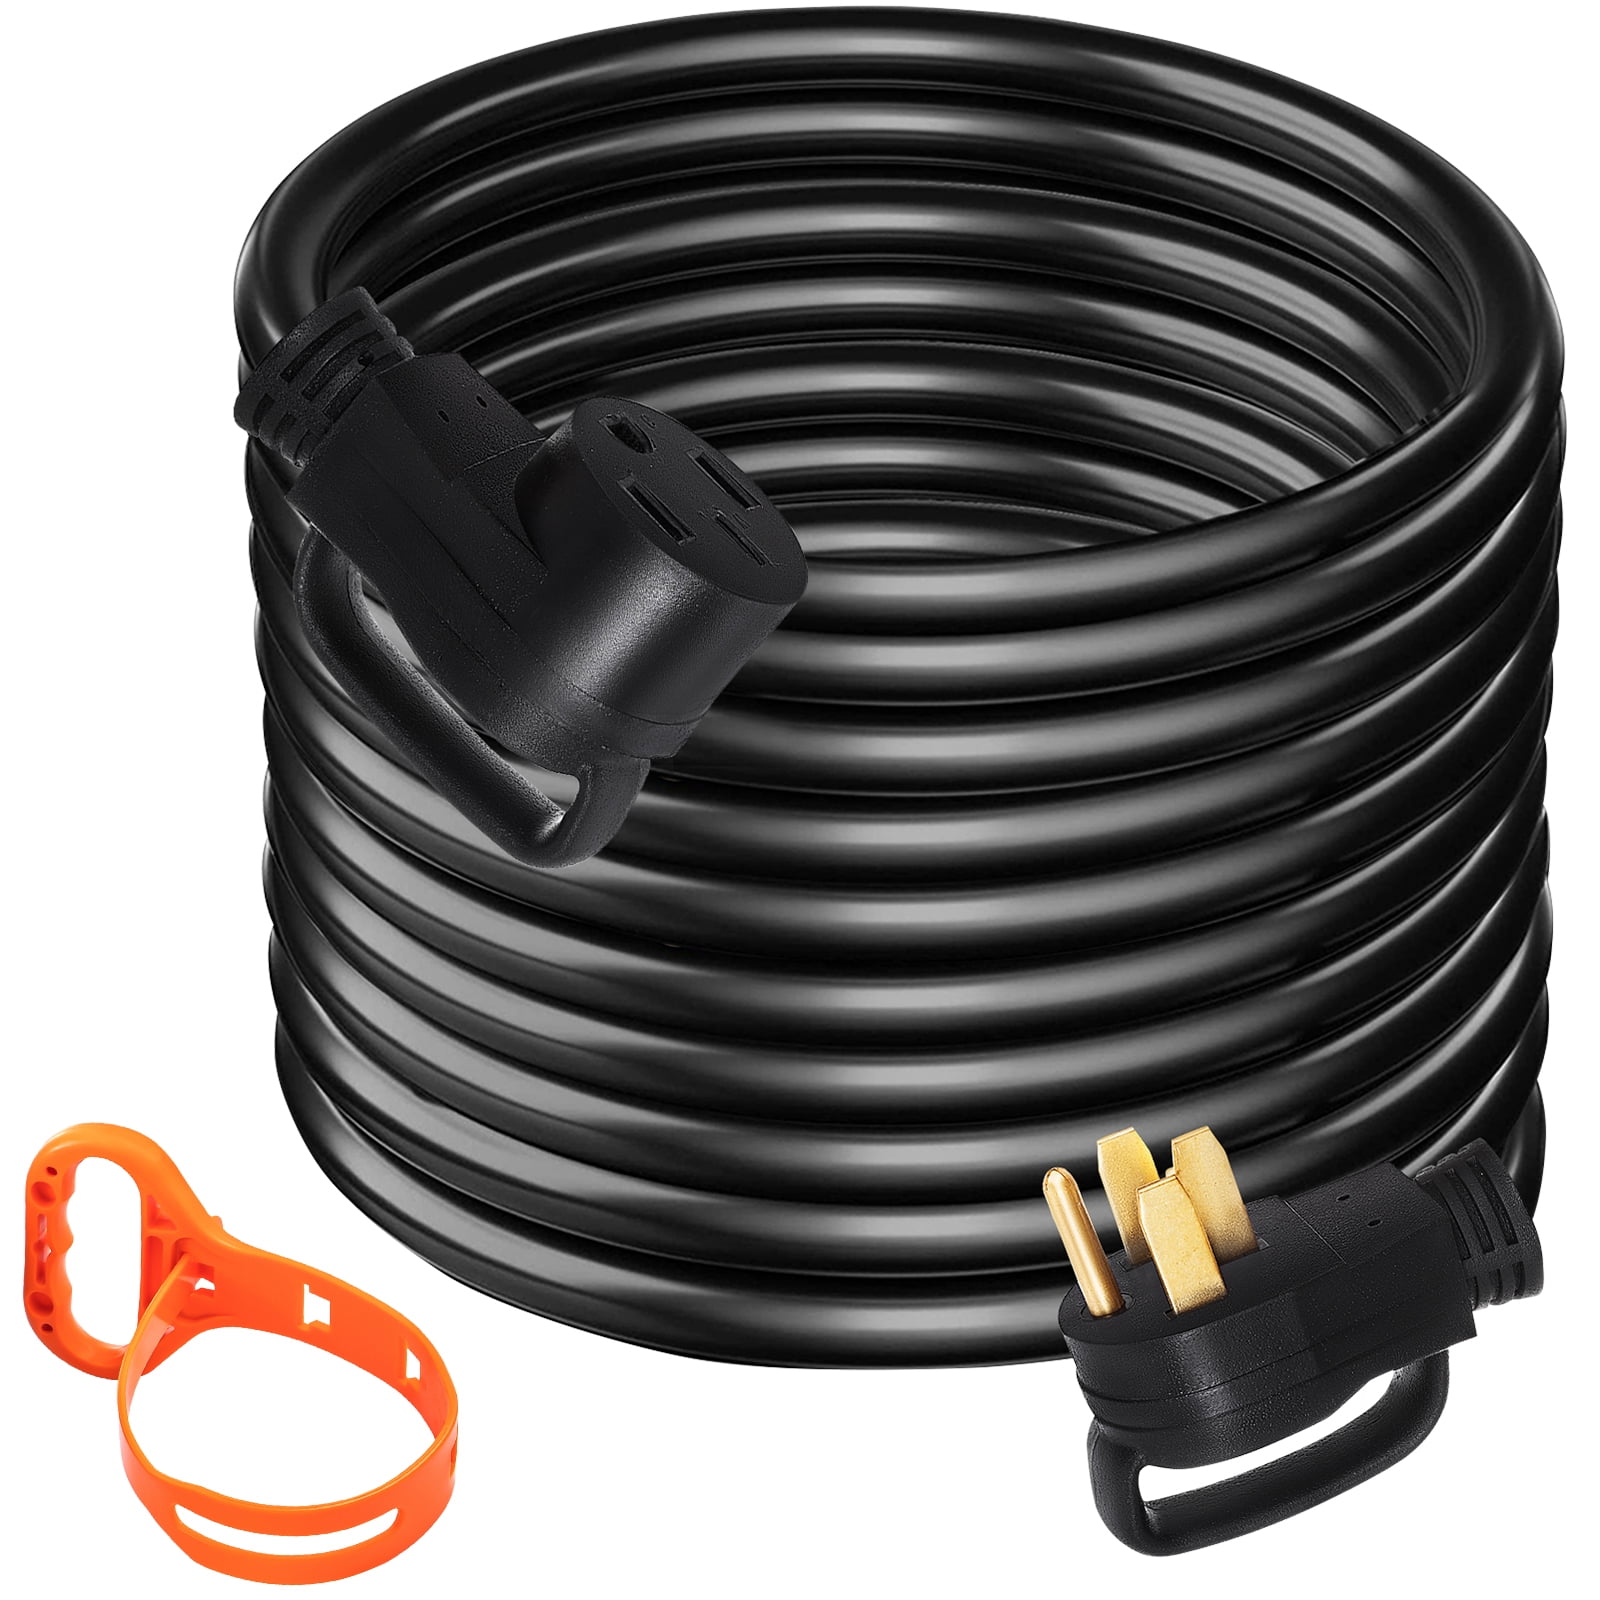 Generac 6329 50ft 30A Generator Power Cord for sale online 